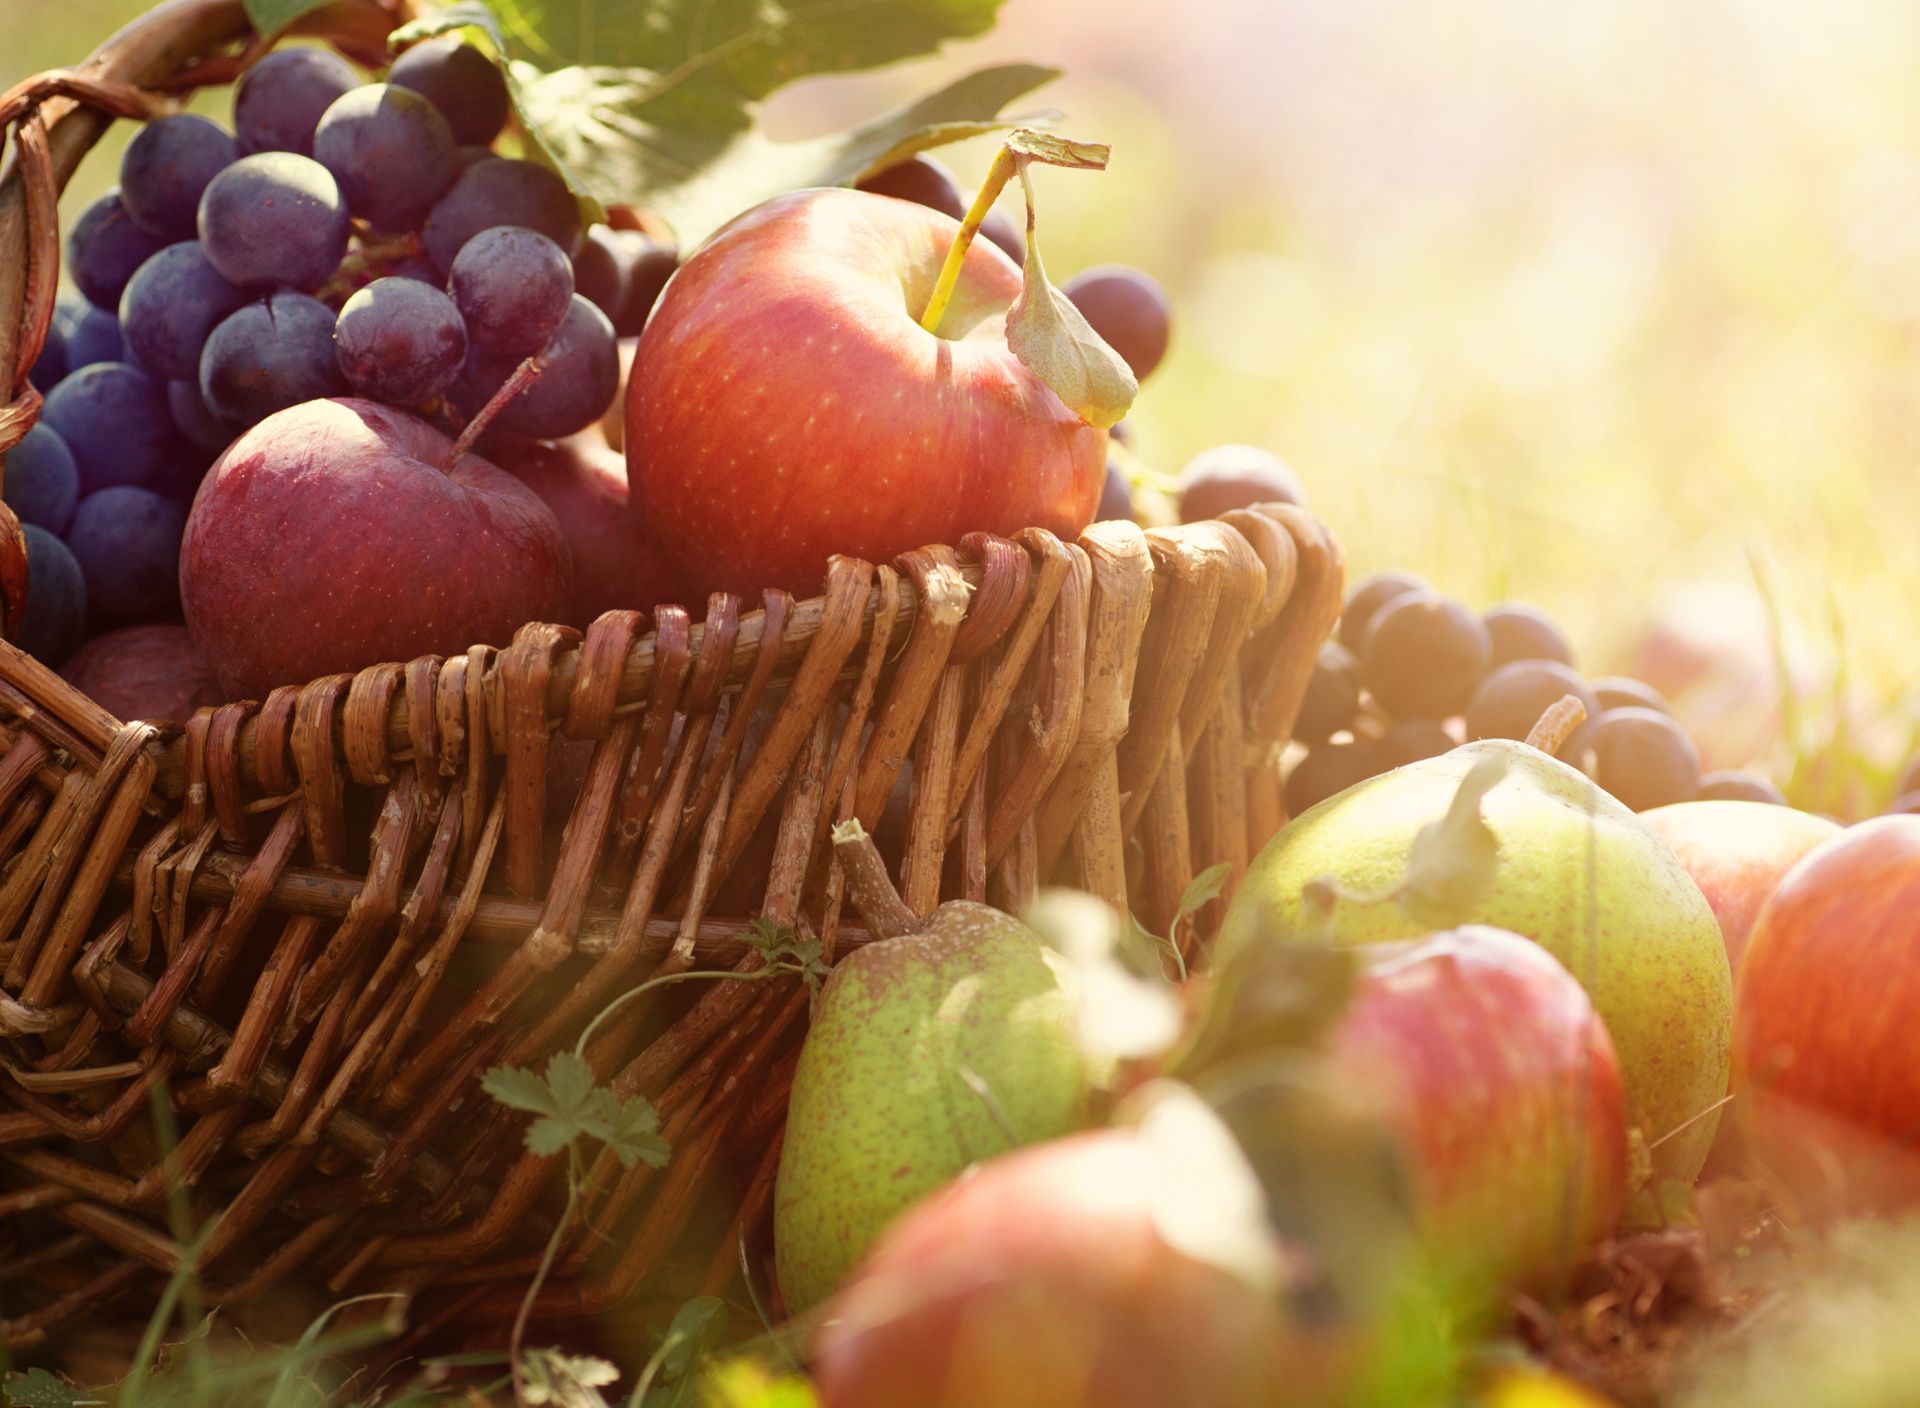 Apples and Grapes wallpaper 1920x1408